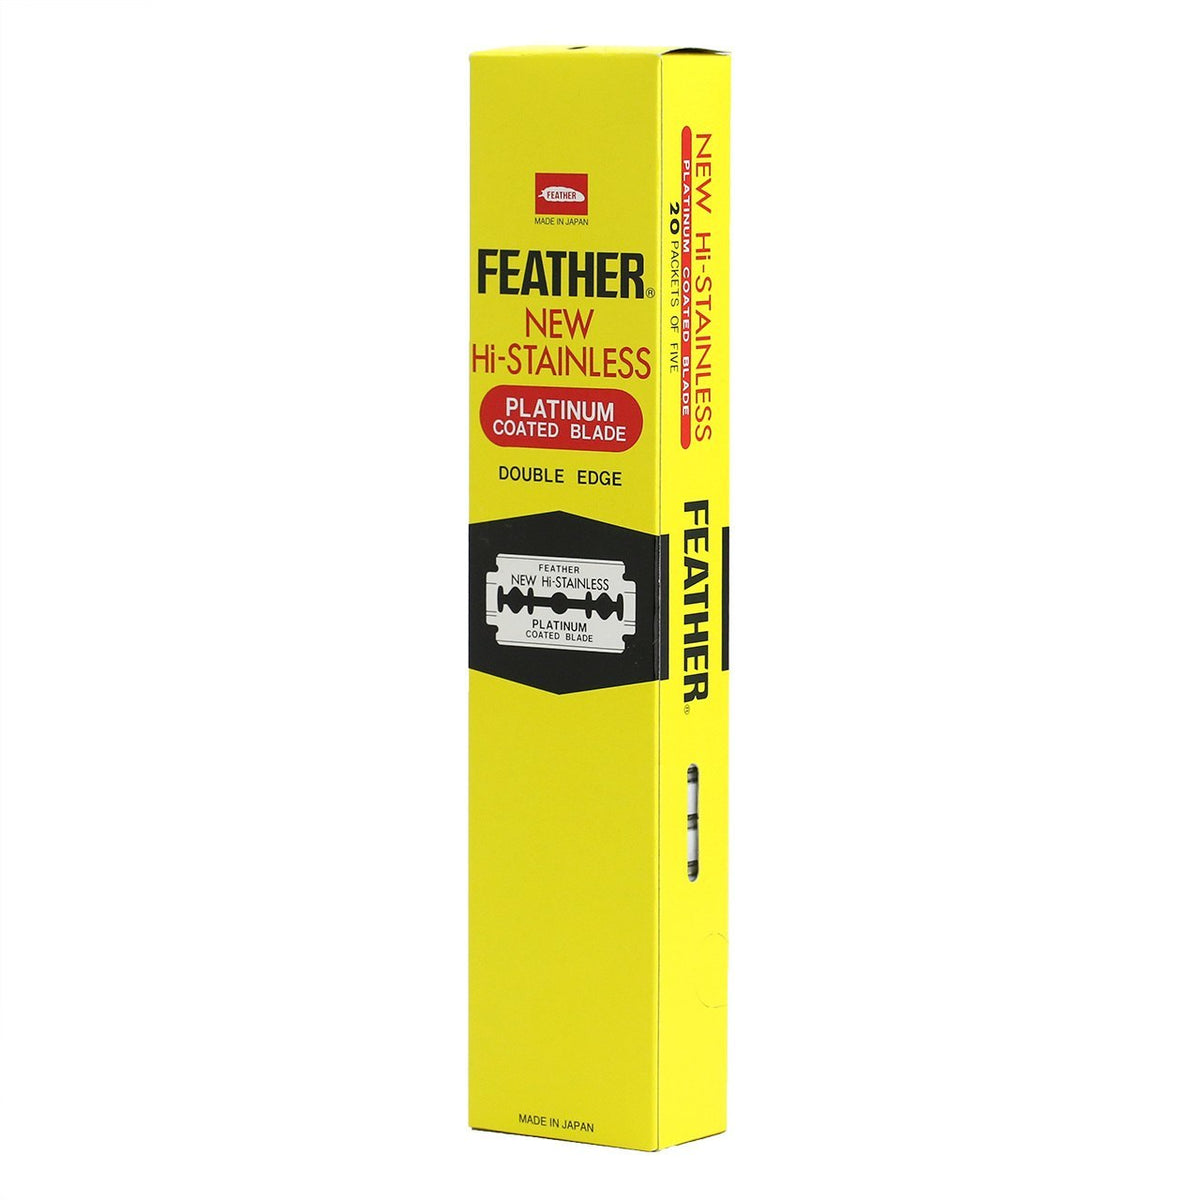 Feather New Hi-Stainless Razor Blades 100 Count